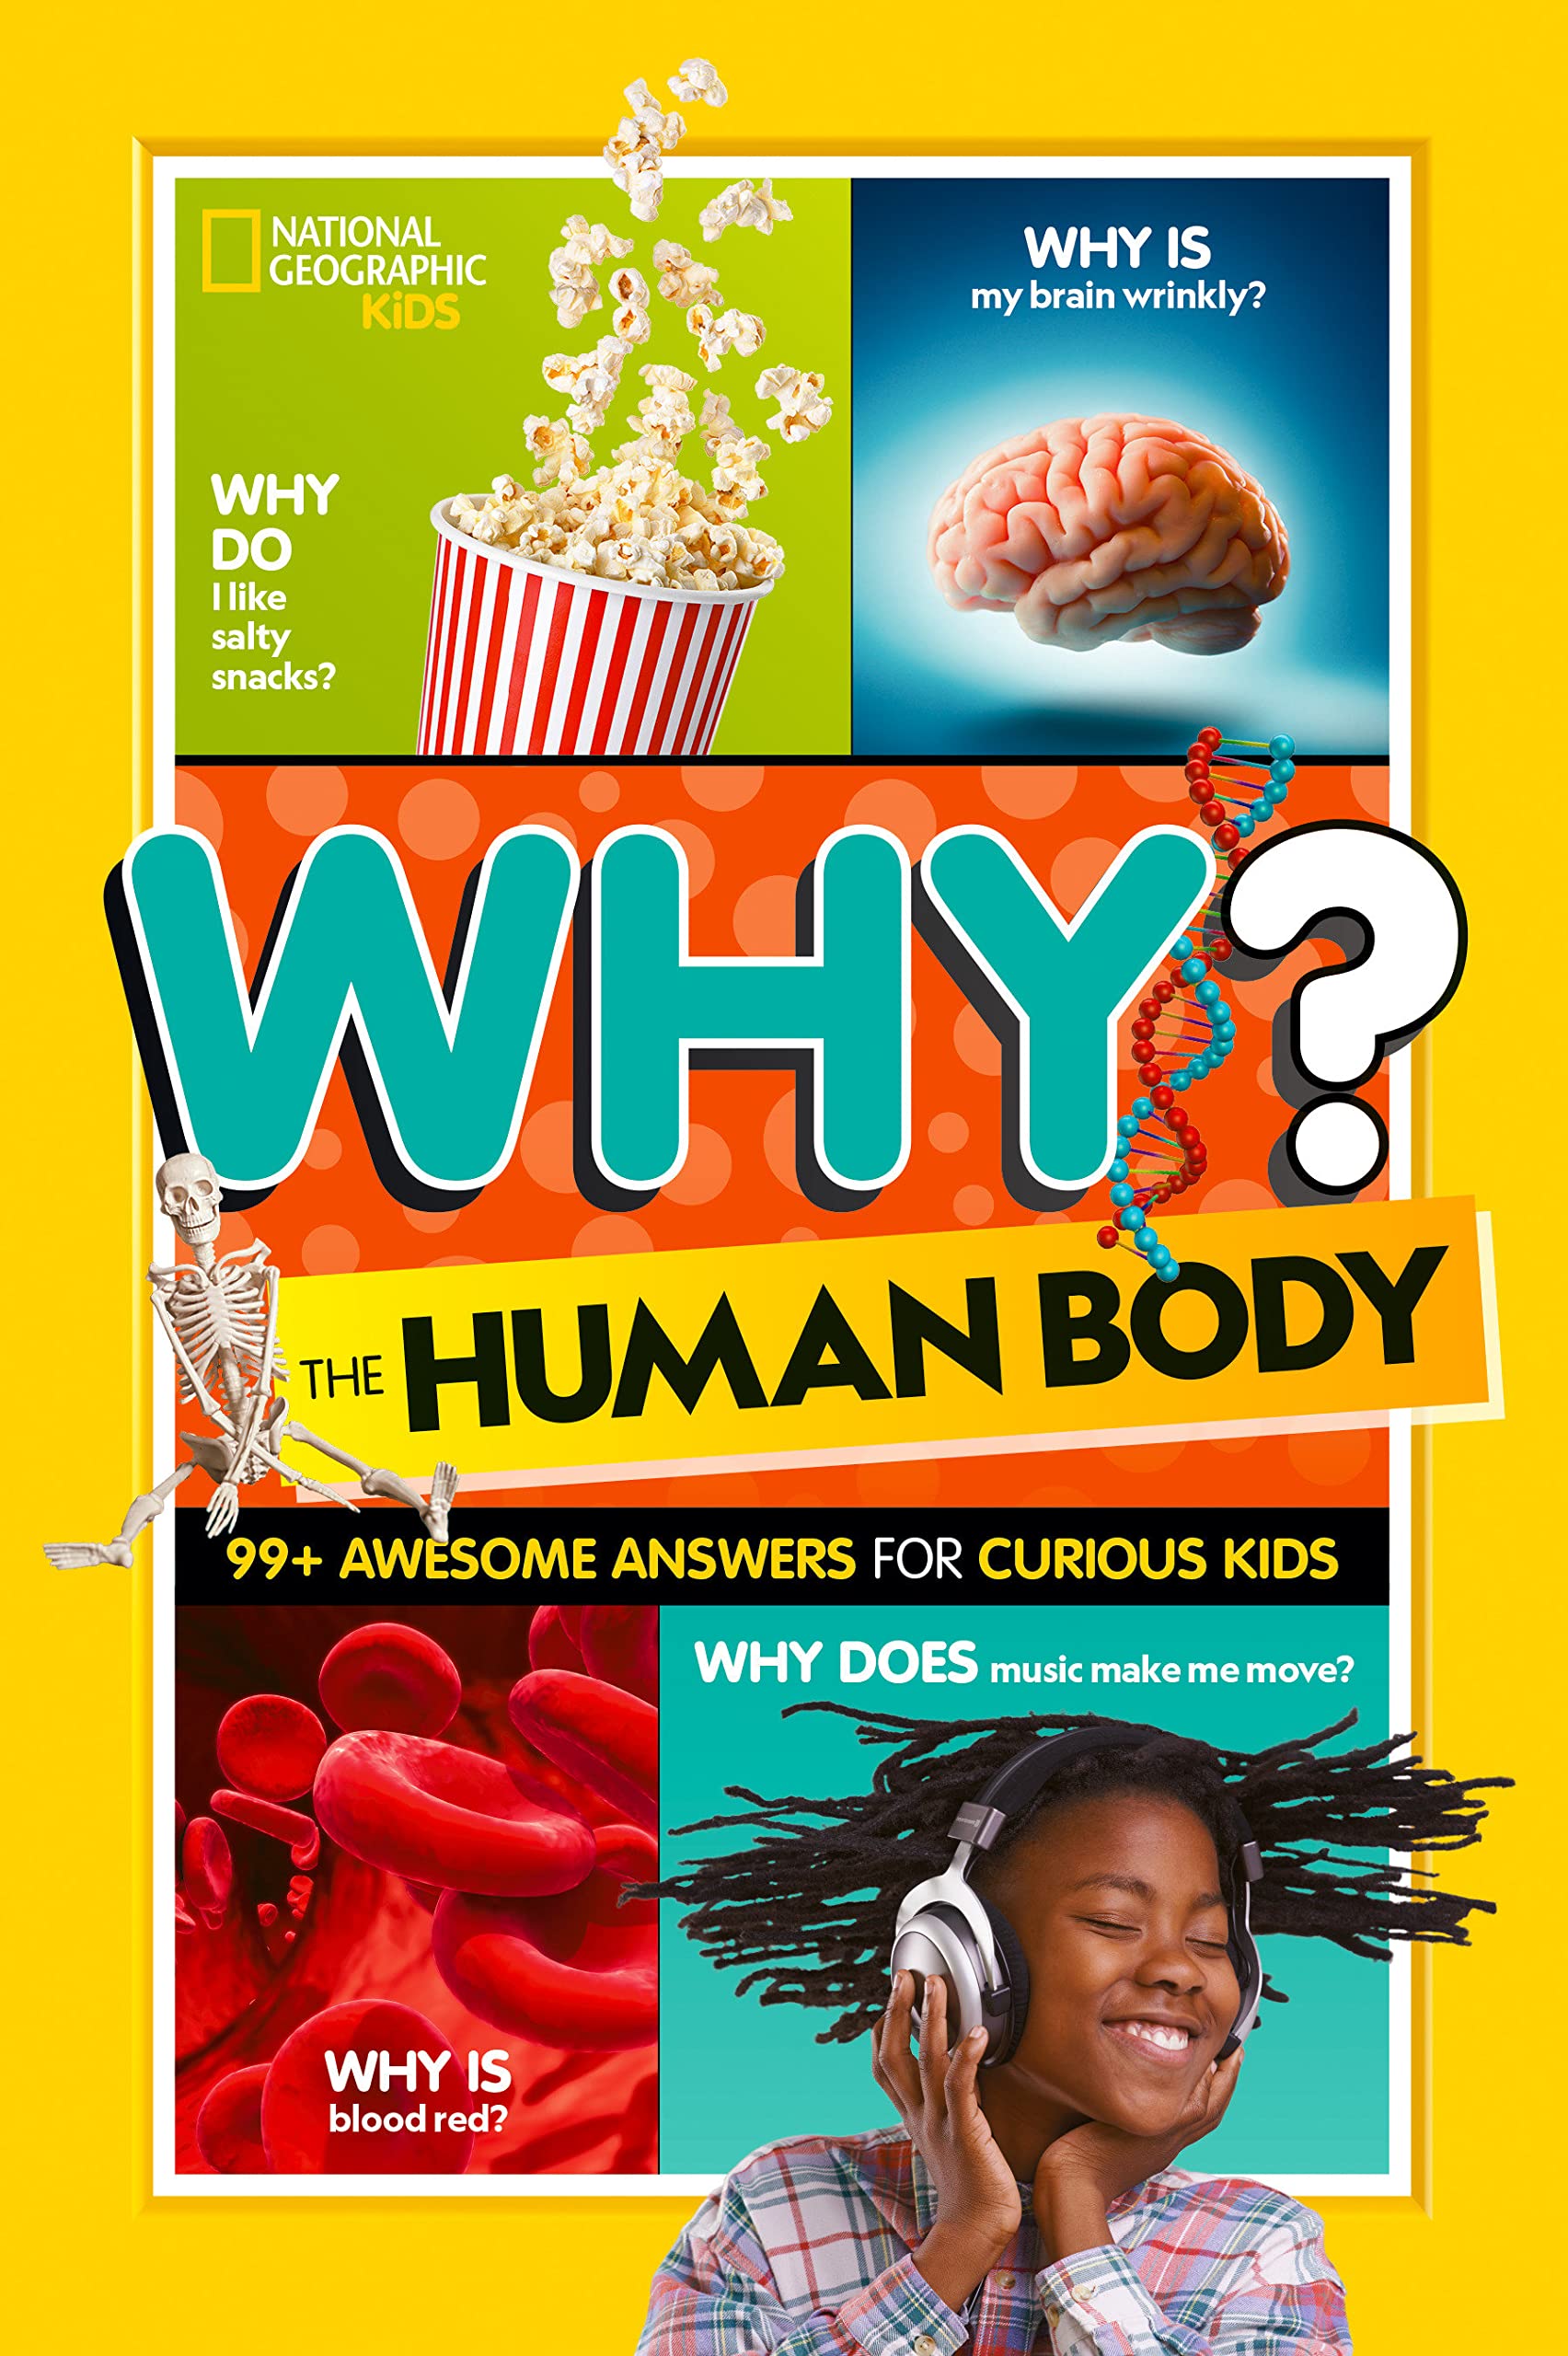 National Geographic Kids: Why? The Human Body - _MS, CHILDREN'S BOOKS, LTR-AUGSEP23, NATIONAL GEOGRAPHIC KIDS, PANSING